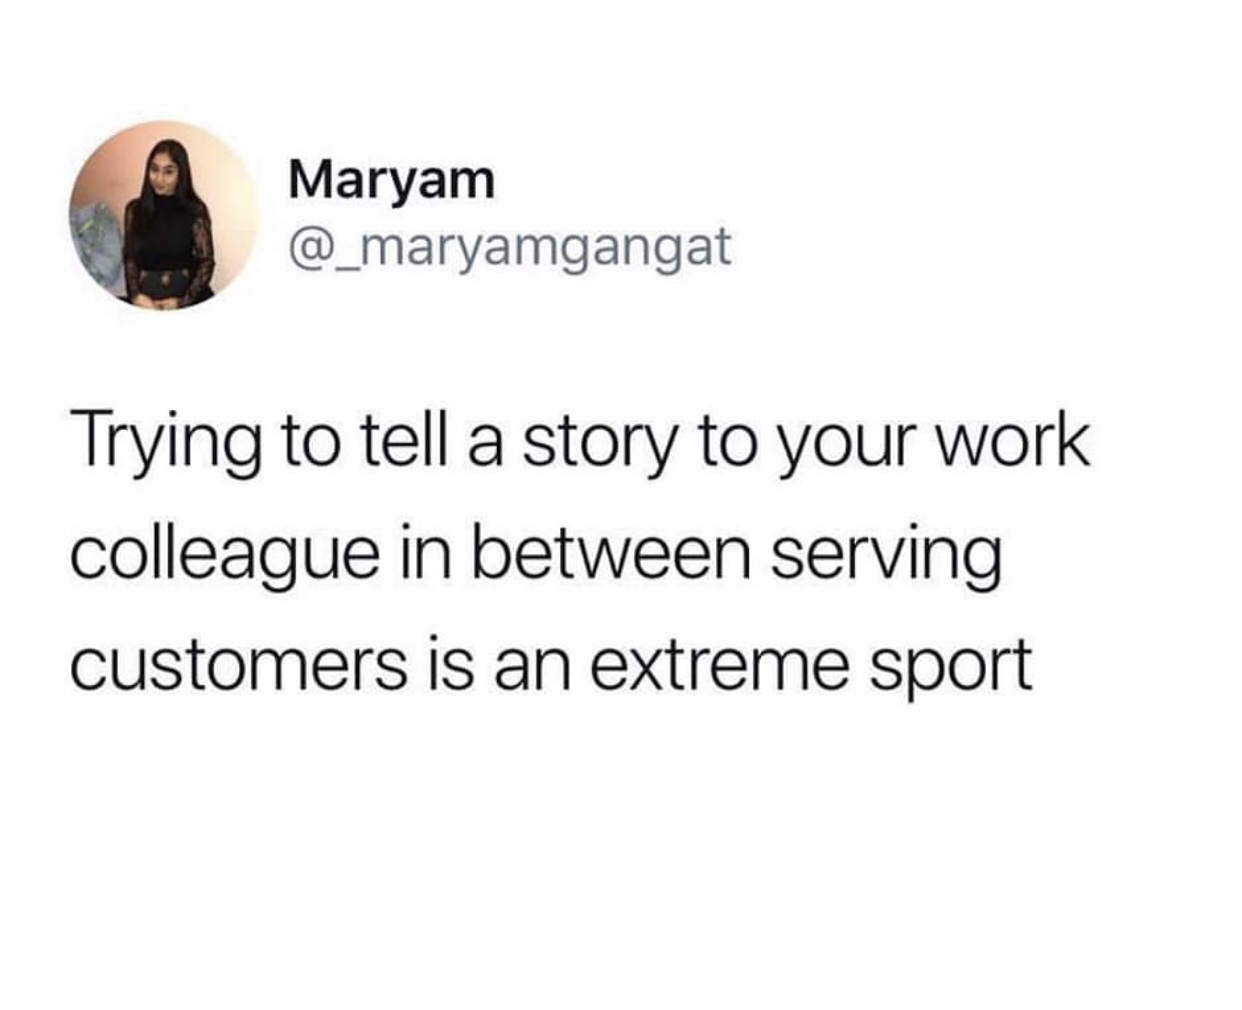 Maryam Trying to tell a story to your work colleague in between serving customers is an extreme sport